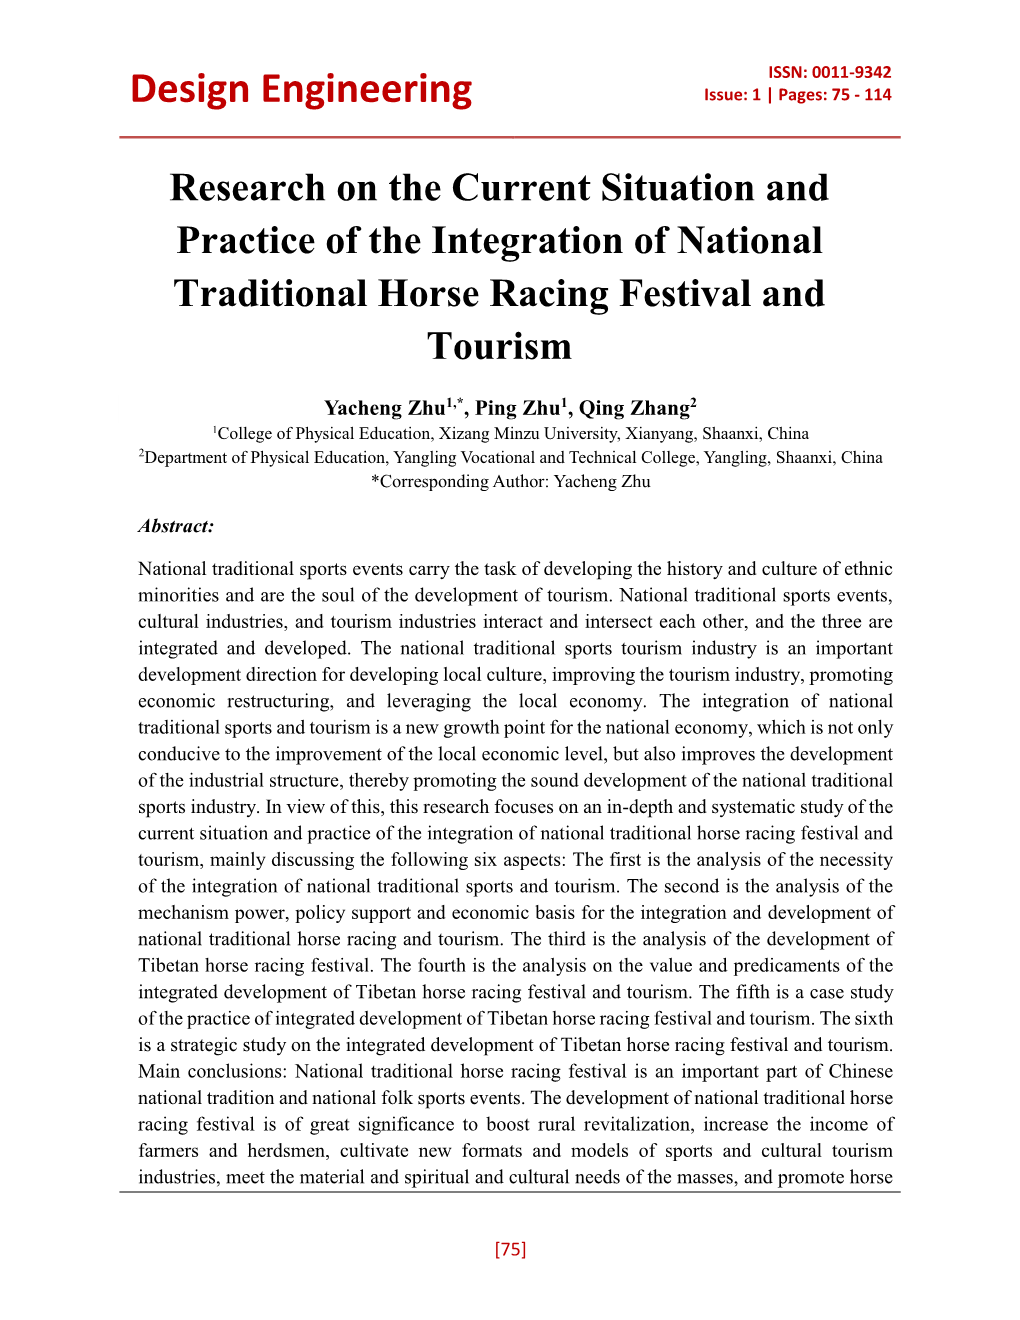 Research on the Current Situation and Practice of the Integration of National Traditional Horse Racing Festival and Tourism